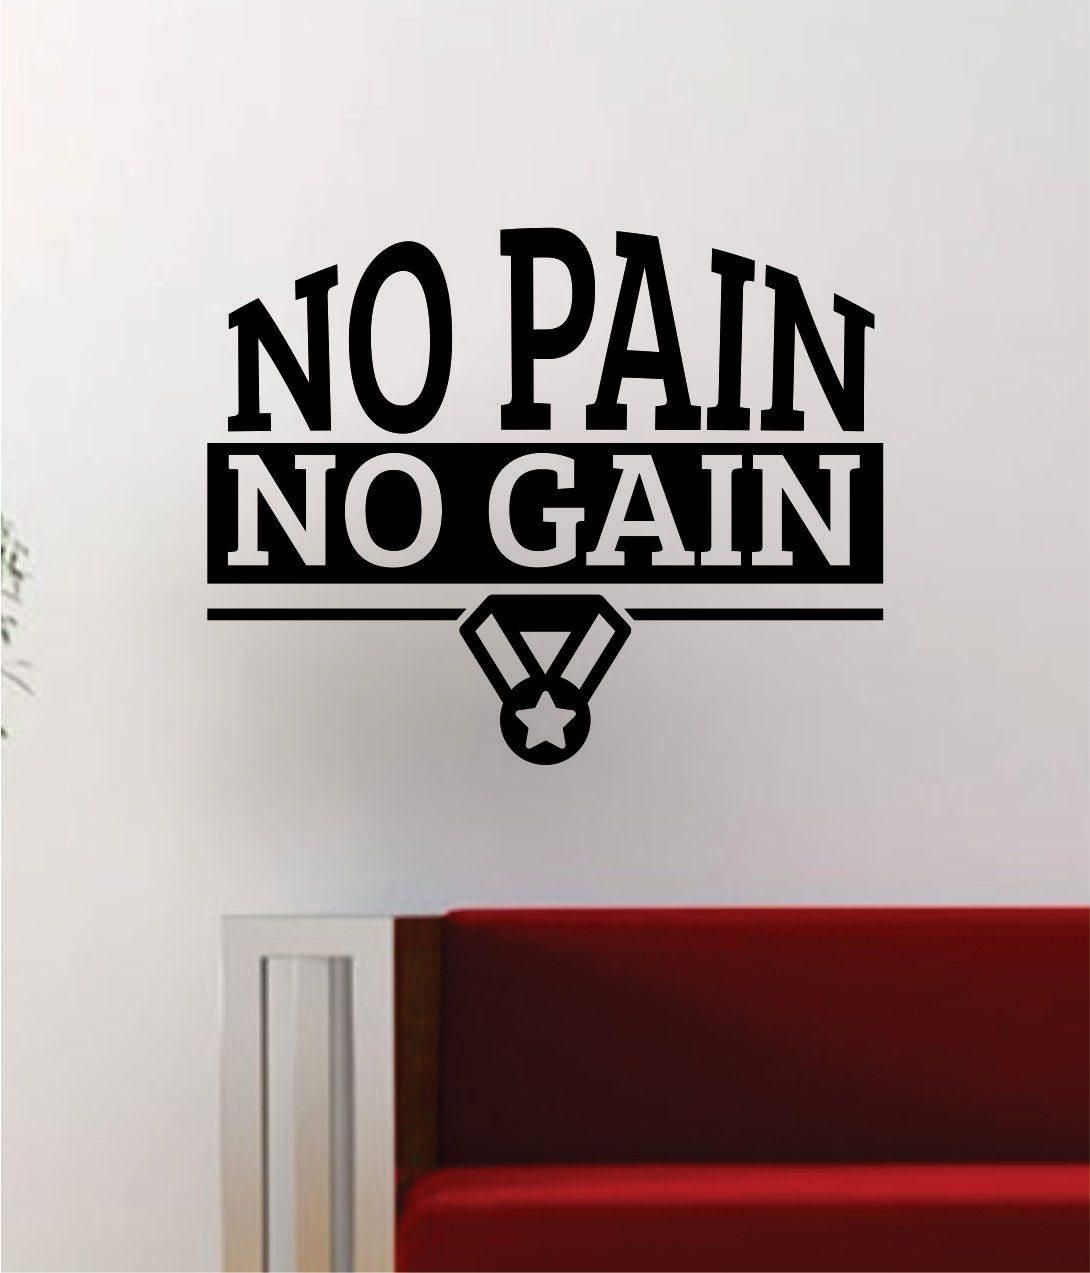 Gym Quote Wall Decals | Gym Wall Art | Wall Stickers | Gym Design In Wall Art For Home Gym (View 2 of 20)